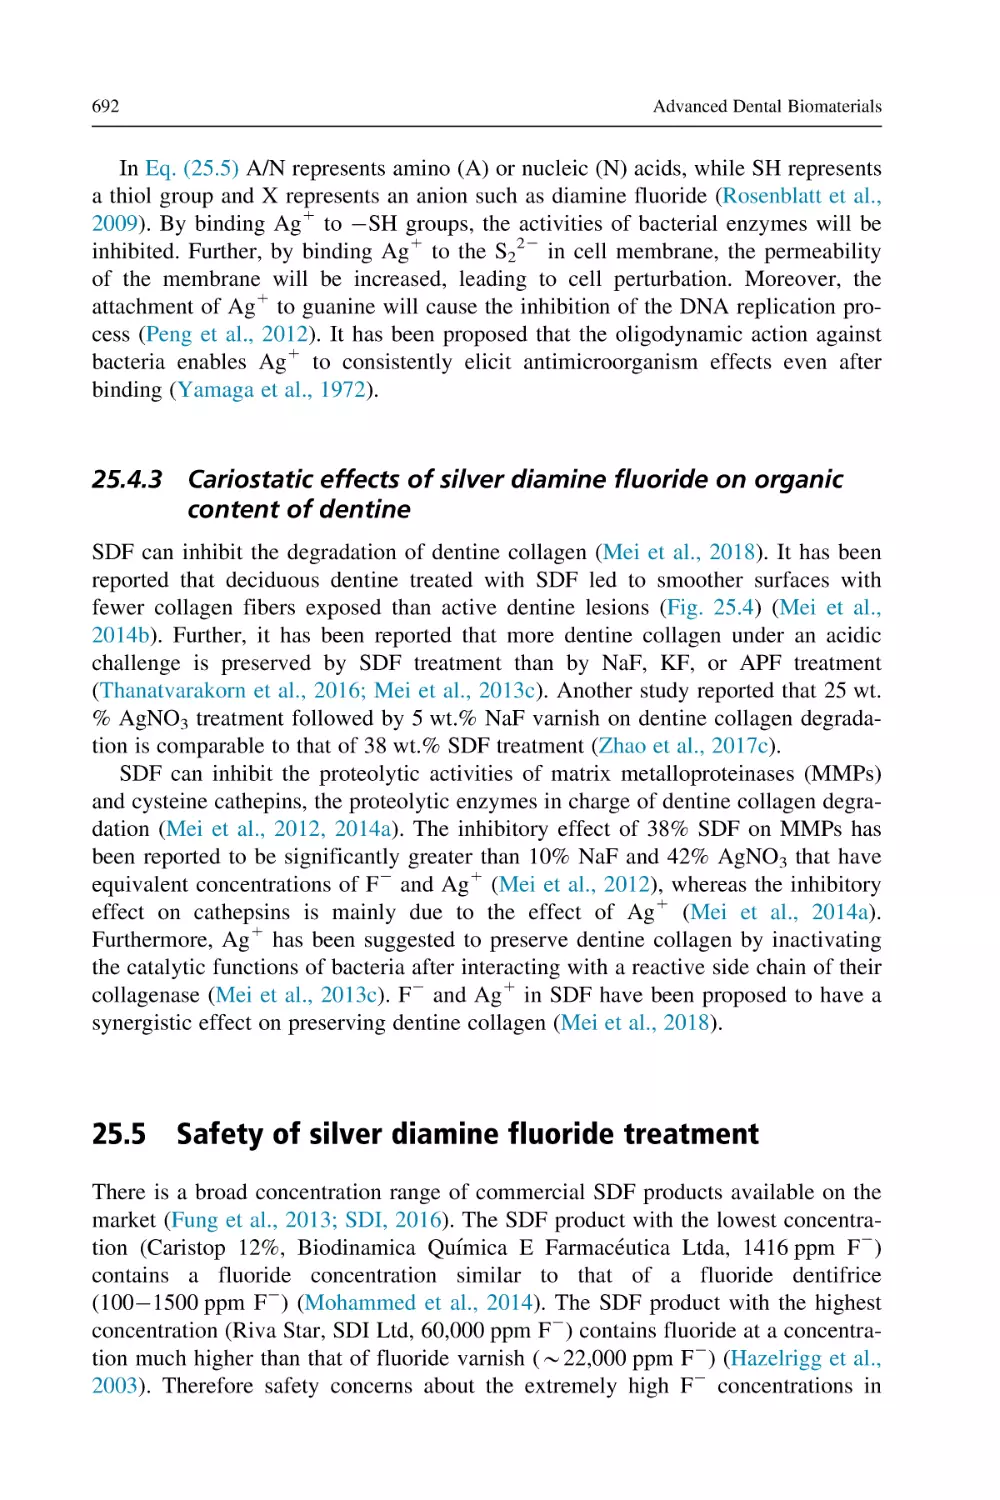 25.4.3 Cariostatic effects of silver diamine fluoride on organic content of dentine
25.5 Safety of silver diamine fluoride treatment